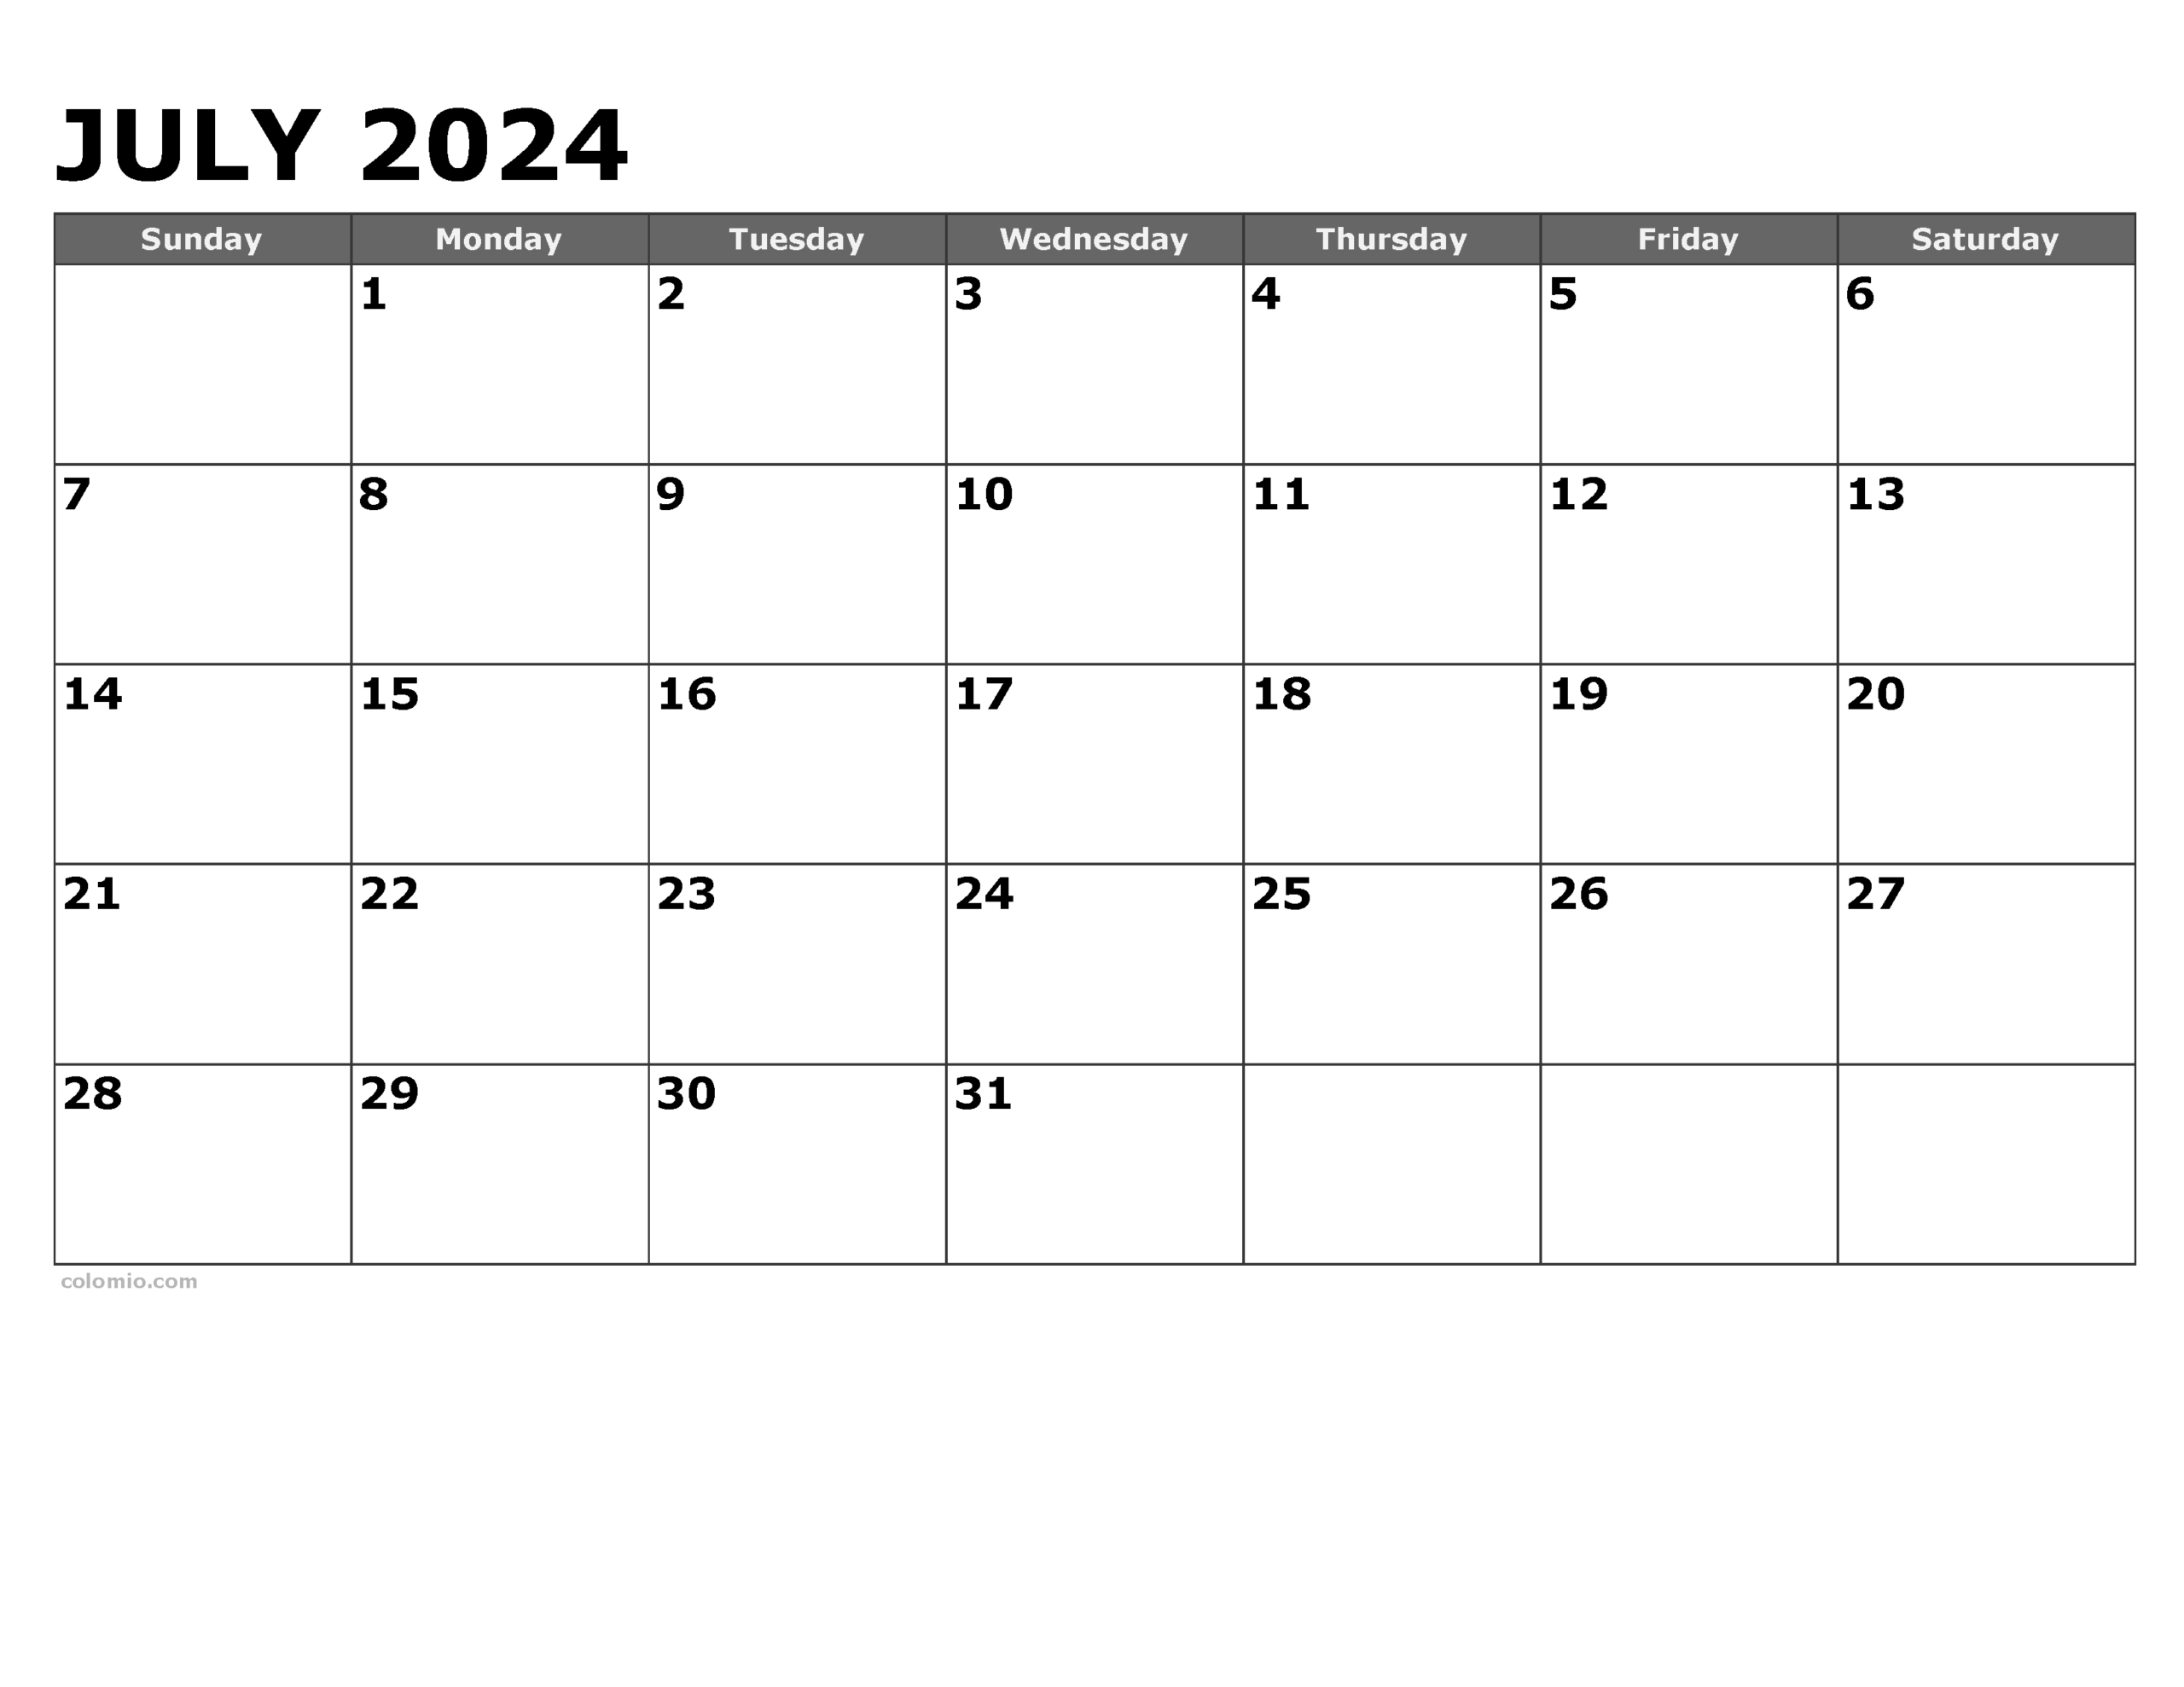 July 2024 Calendar | Free Printable Pdf, Xls And Png with regard to July 2024 Calendar Days